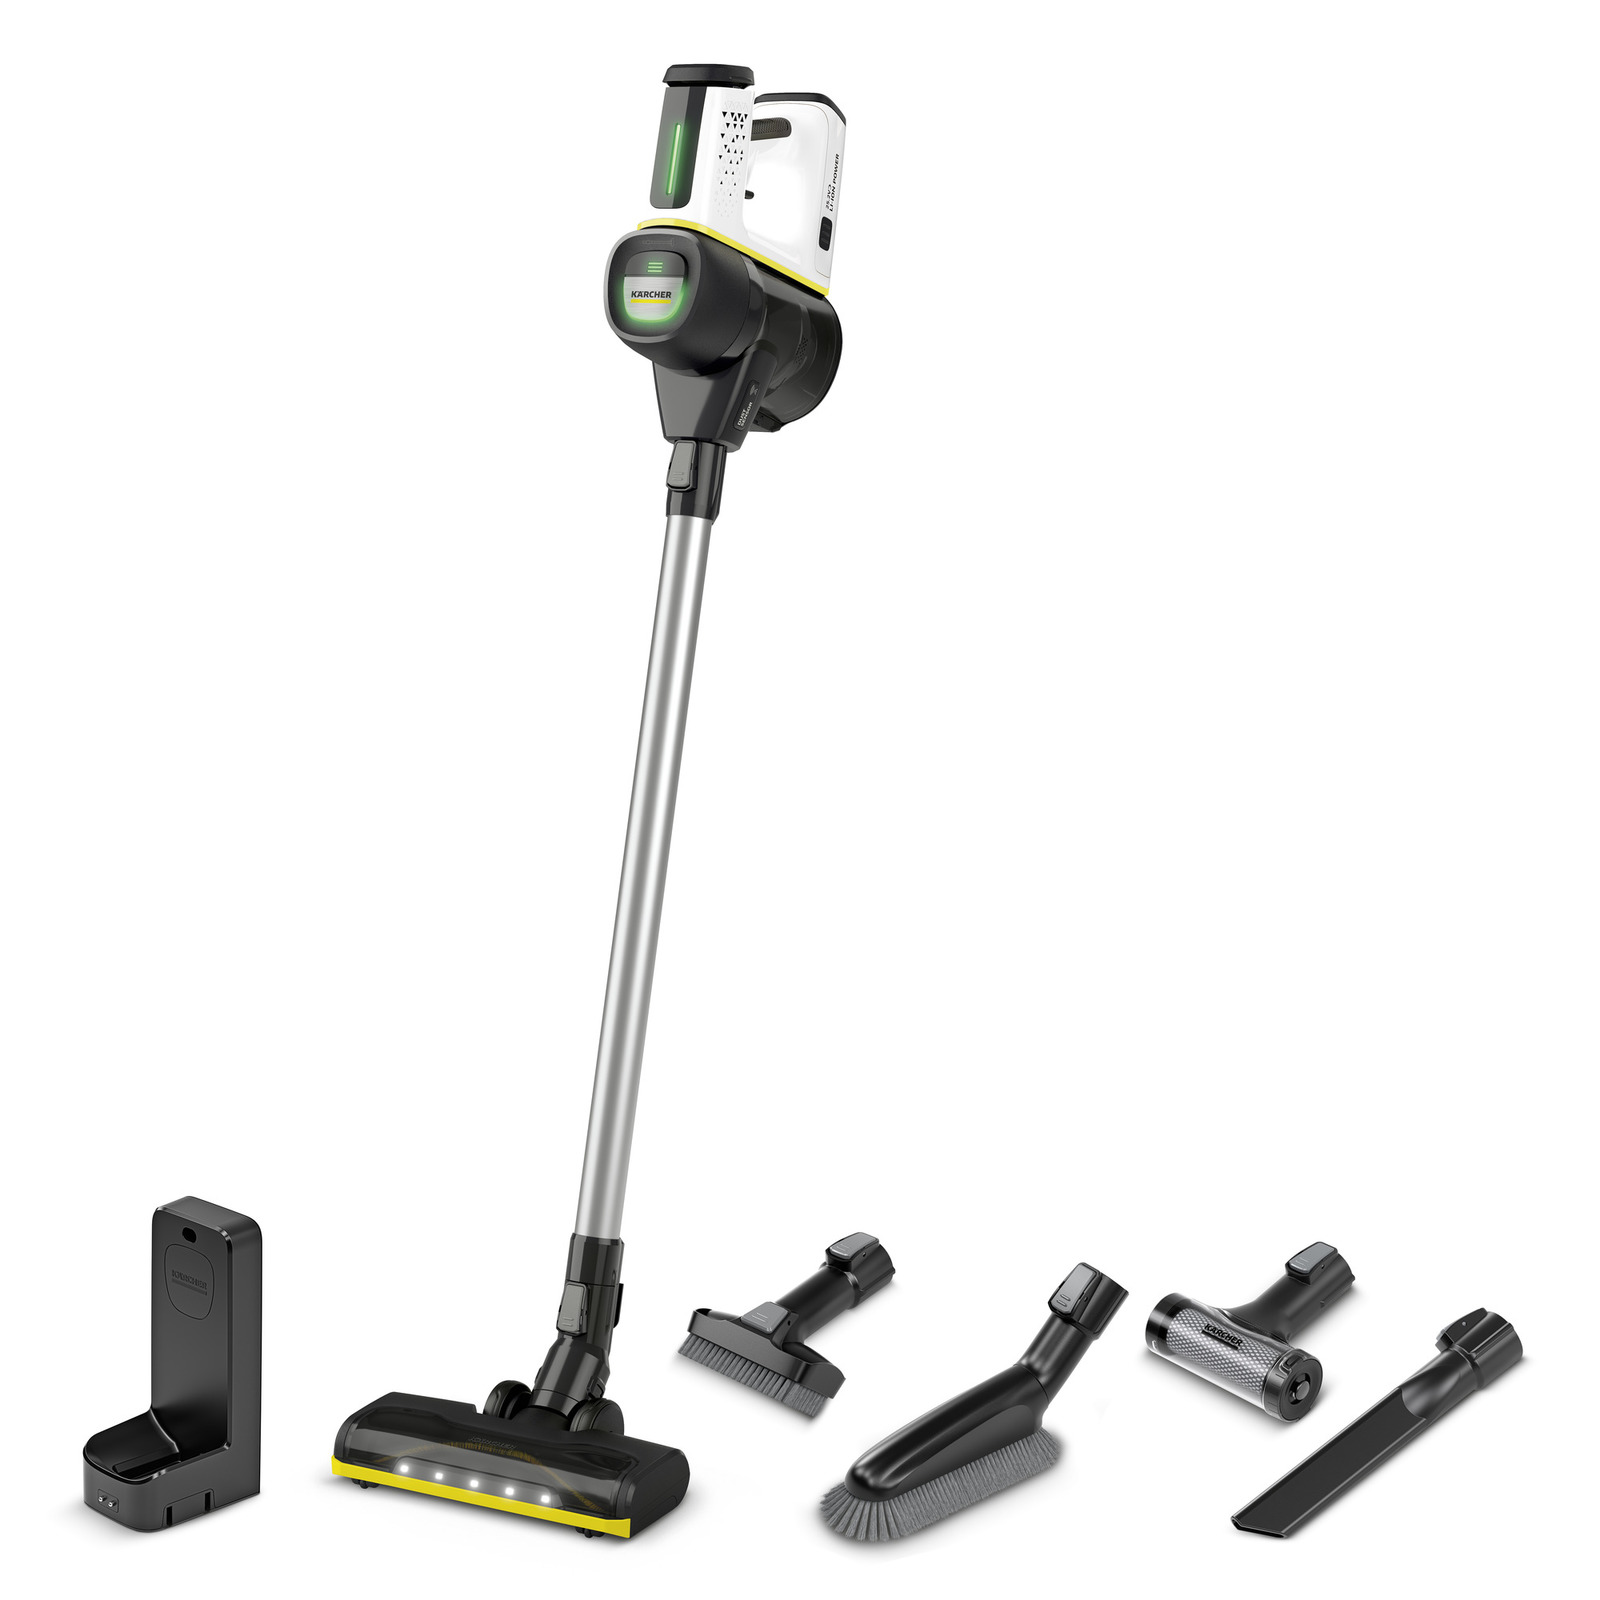 New Karcher Vacuum Cleaners - WOW, garden, vacuum cleaner